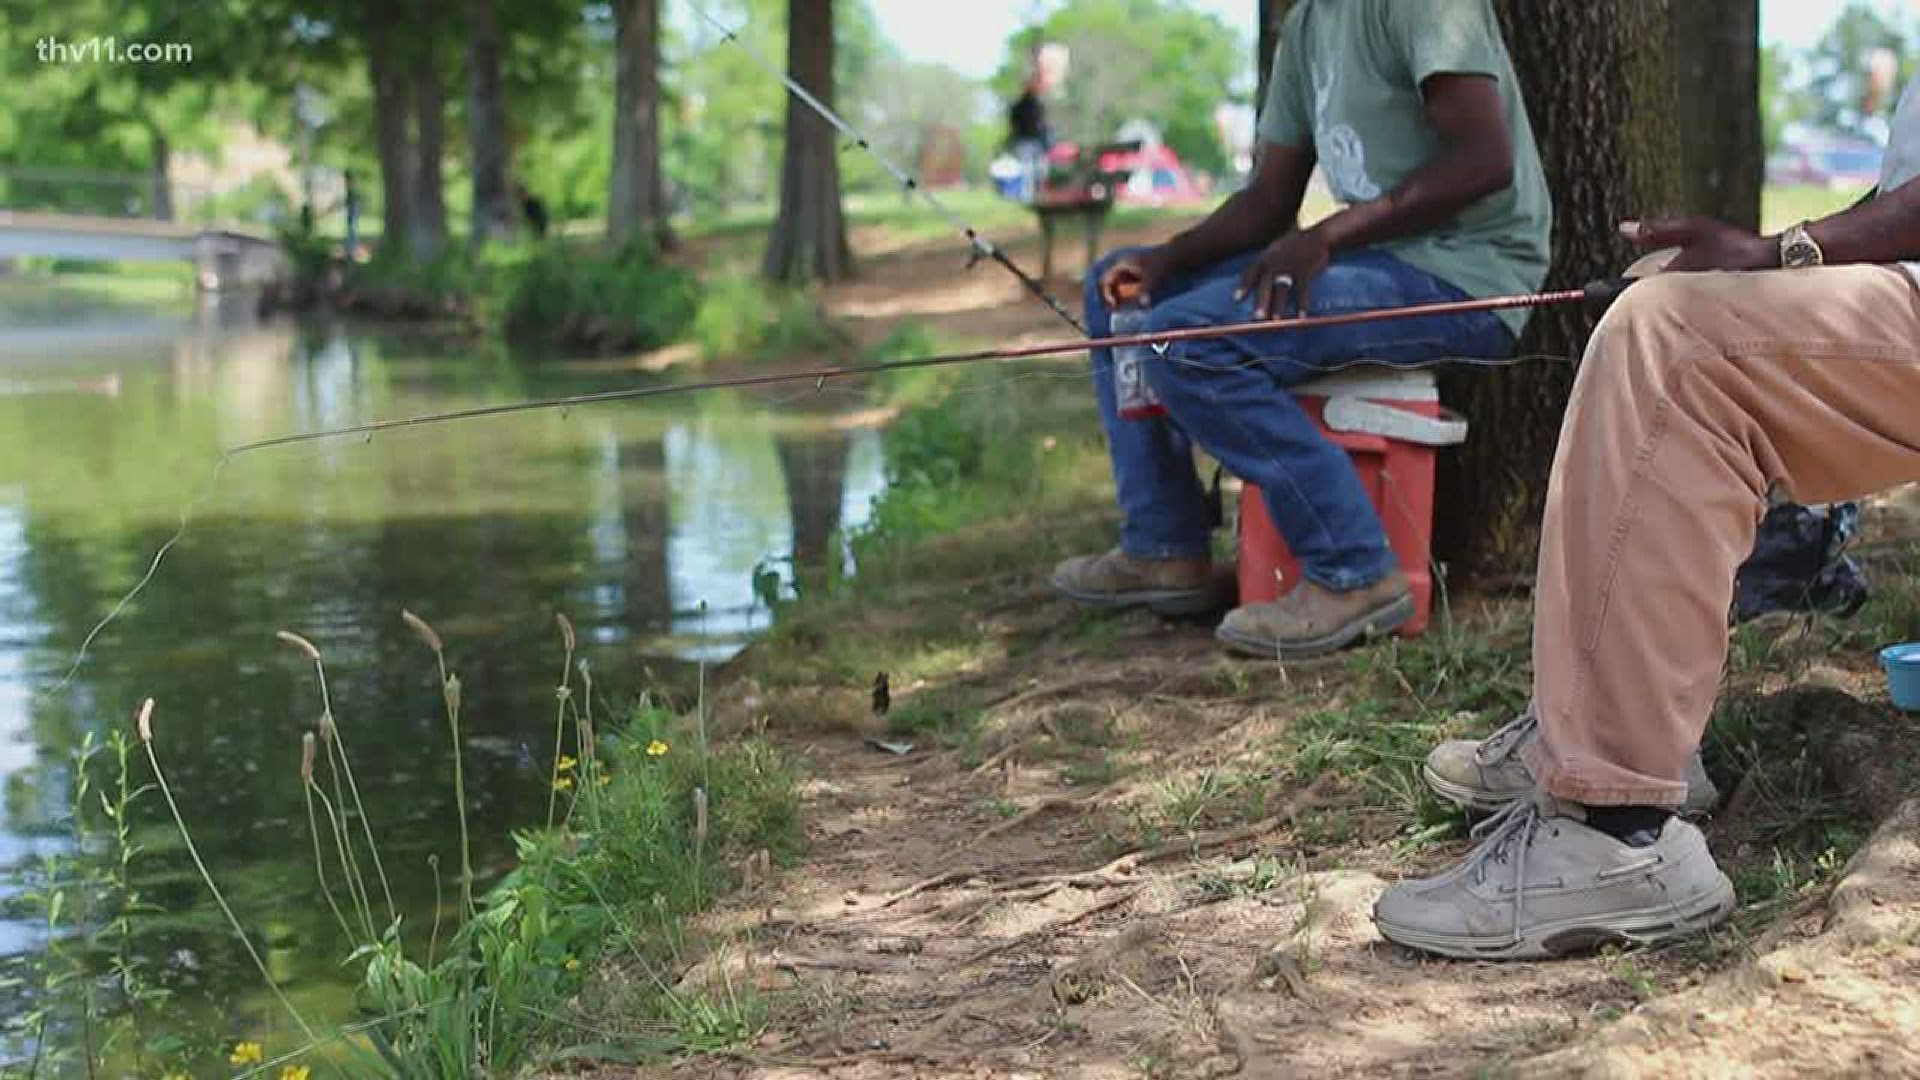 If you're still trying to figure out something to do this weekend, it's free fishing weekend!